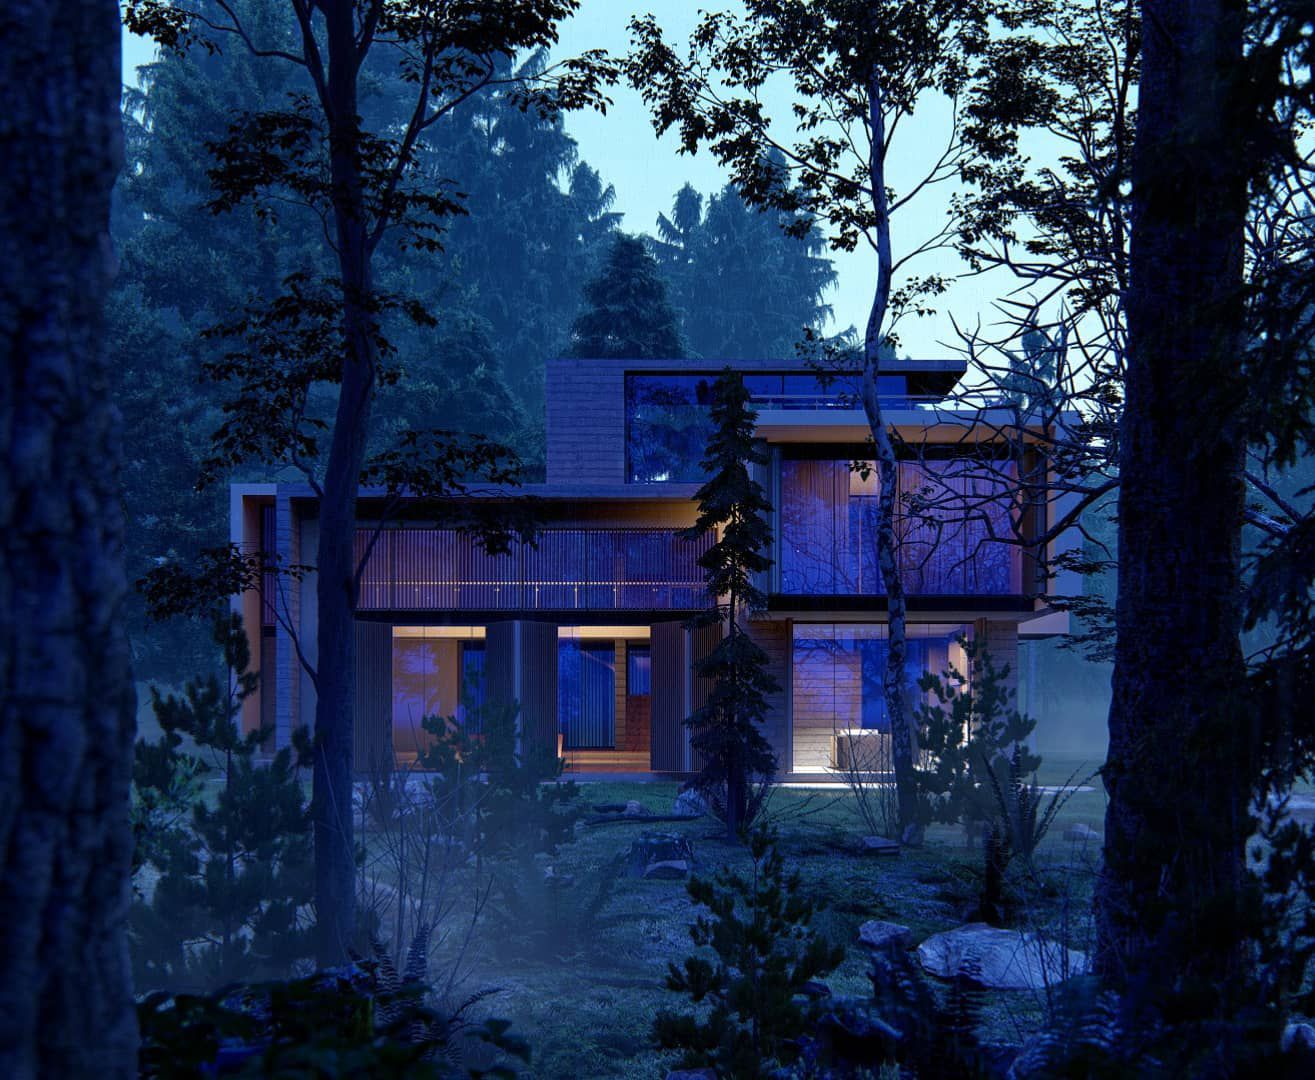 House in the woods (evening light), model provided by Diego Tapia.